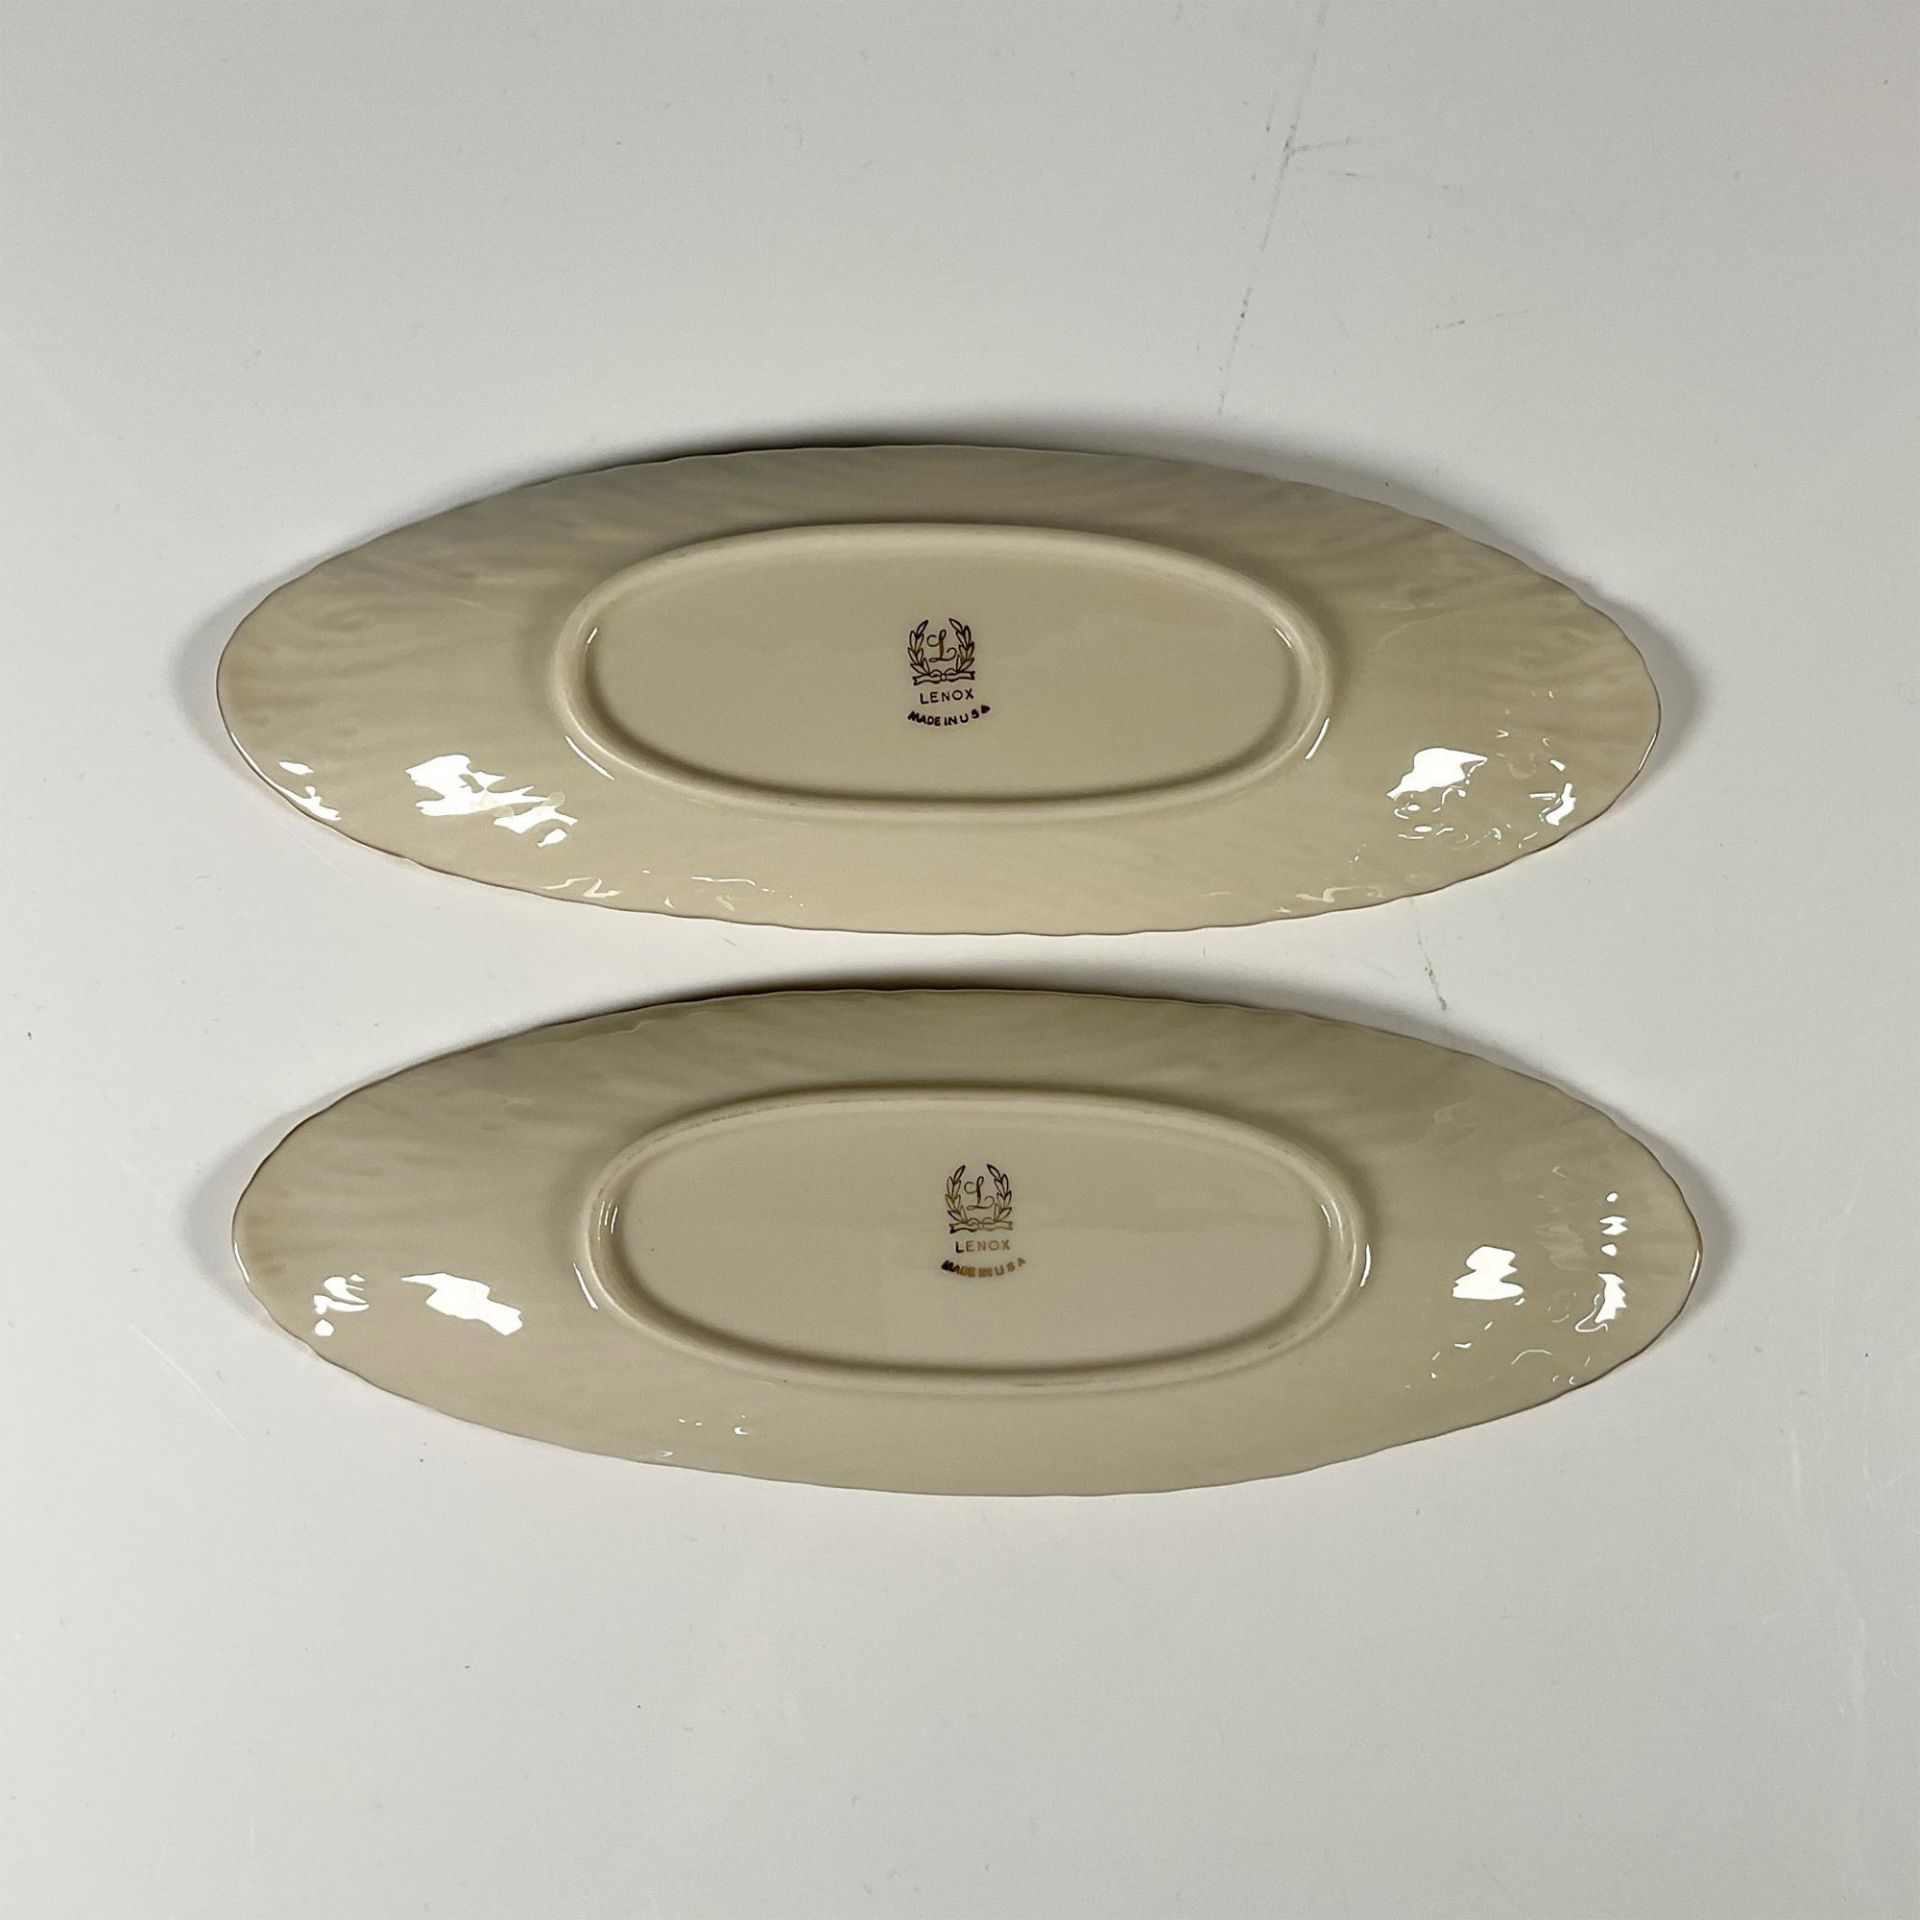 2pc Lenox Open Butter Dishes - Image 3 of 3